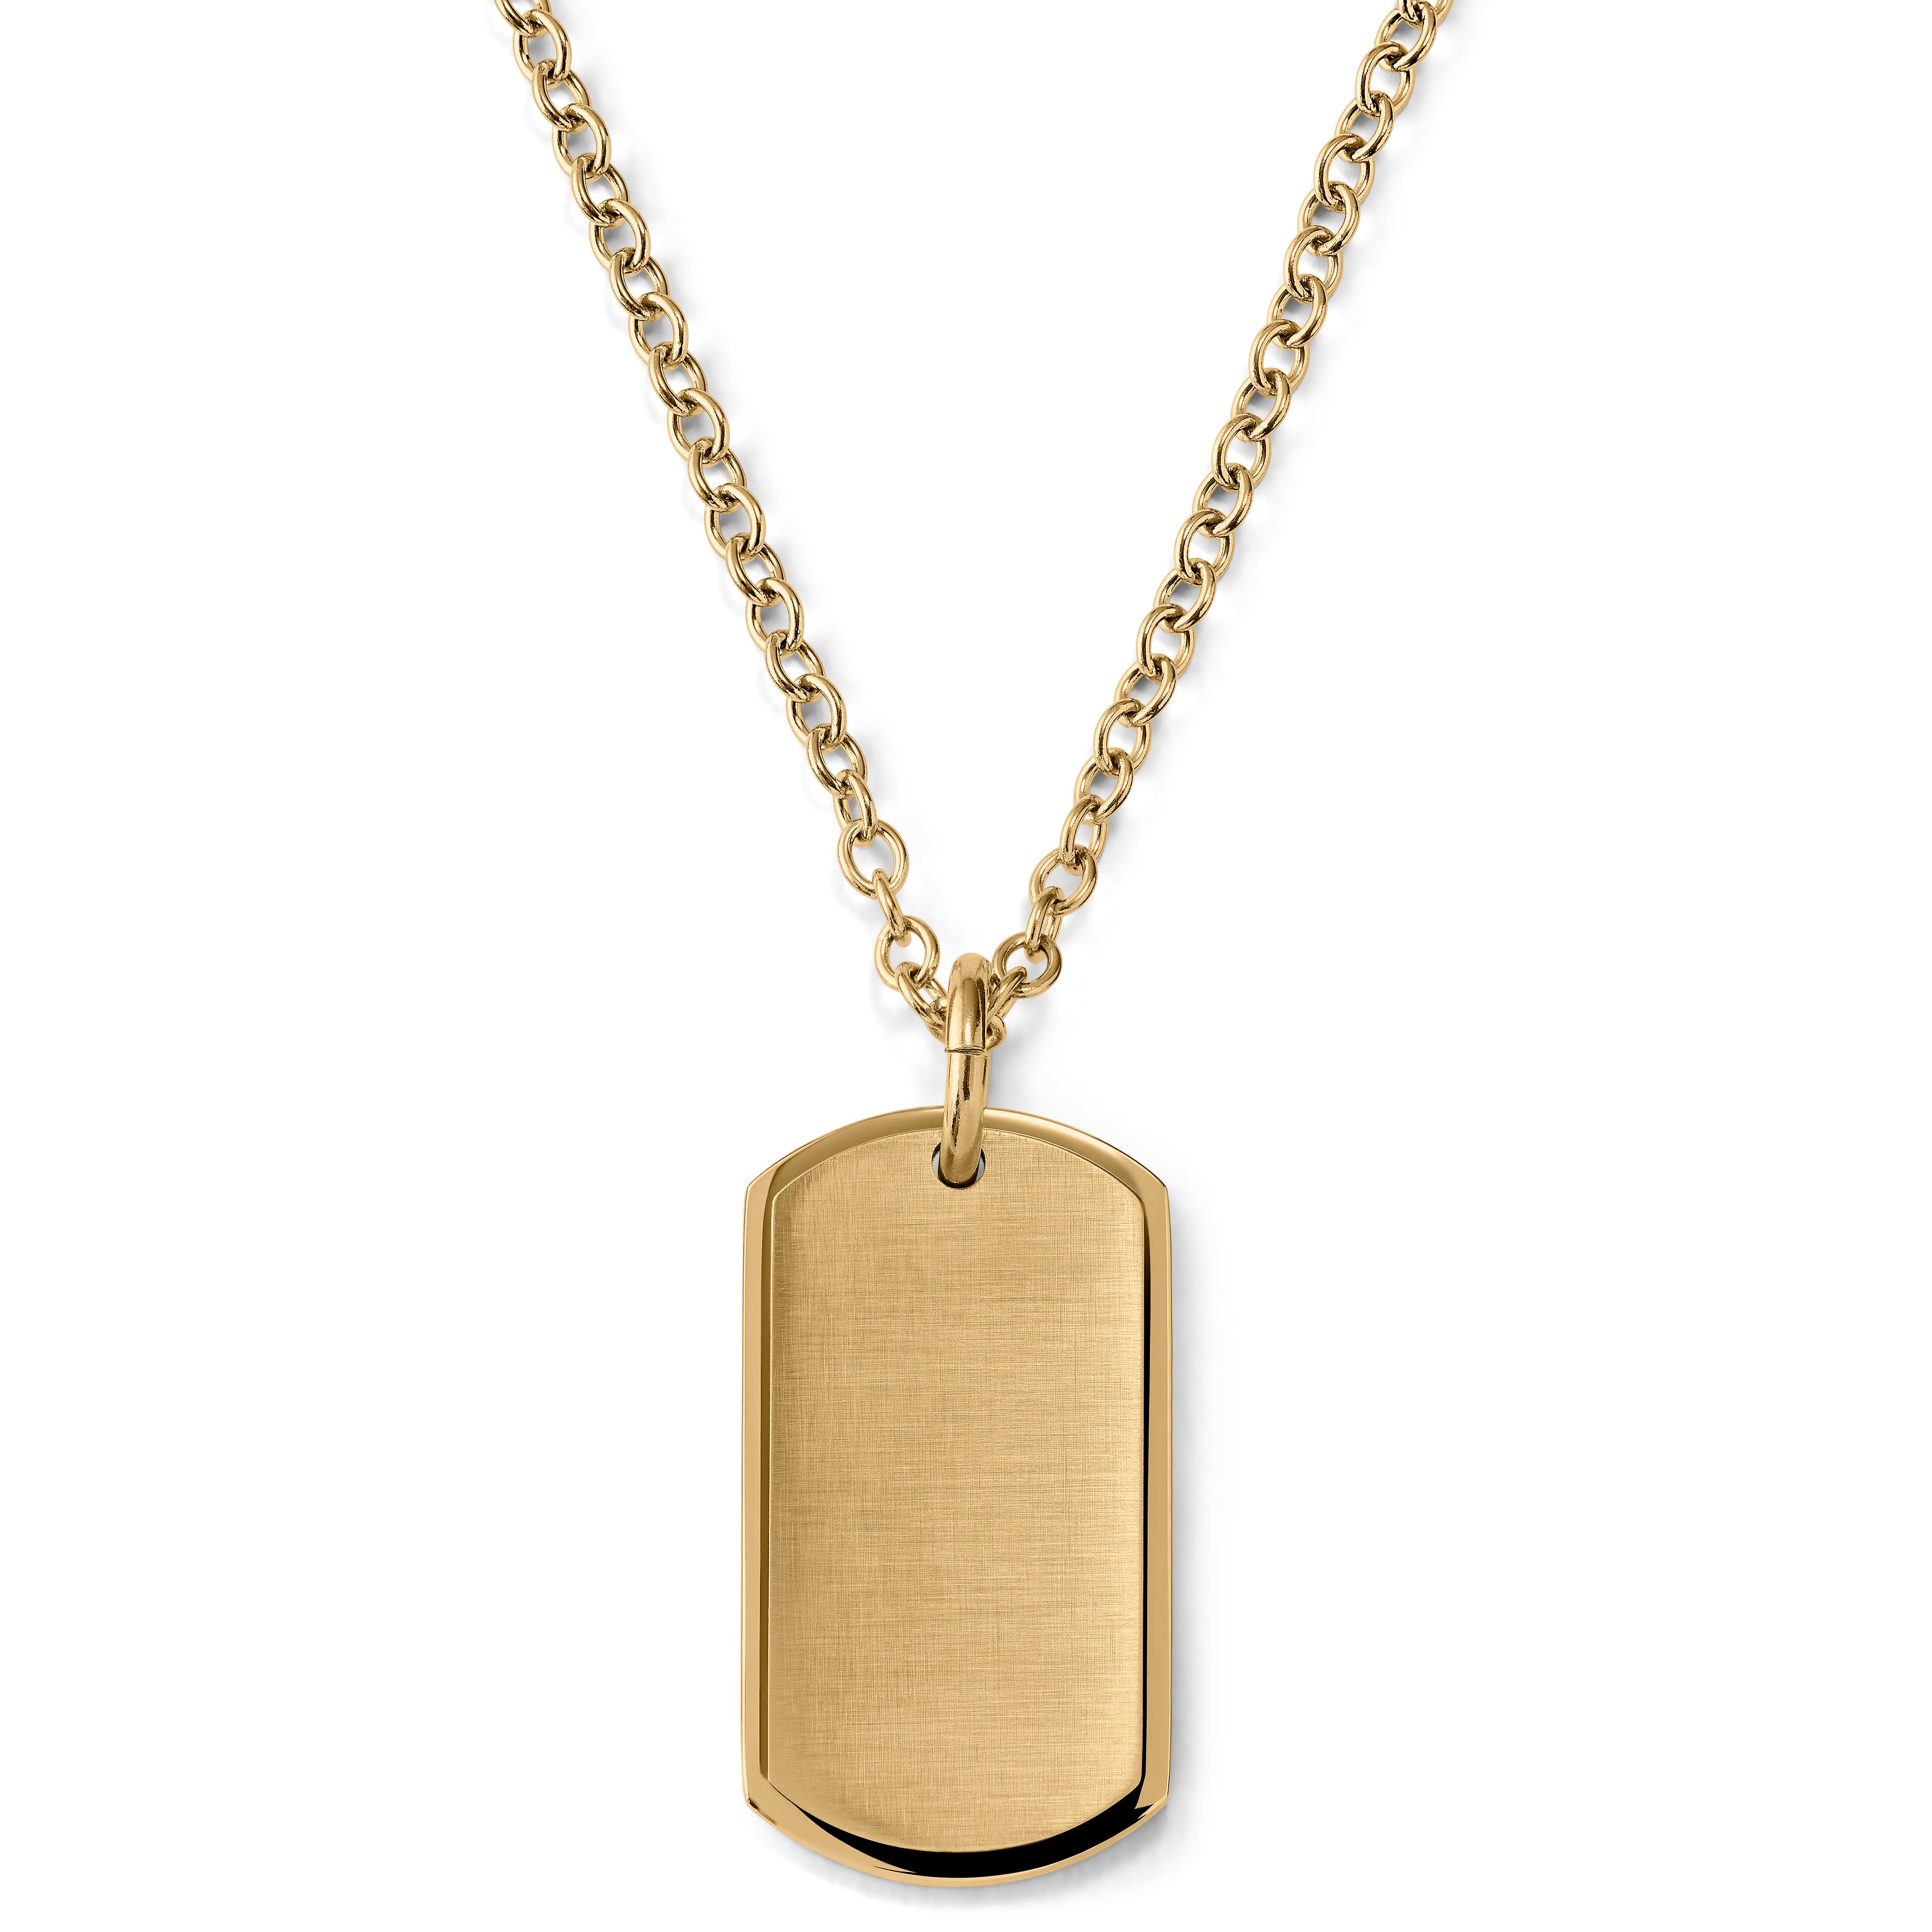 Women's Engravable 14K Gold Flat-Edge Dog Tag Necklace with Link Chain